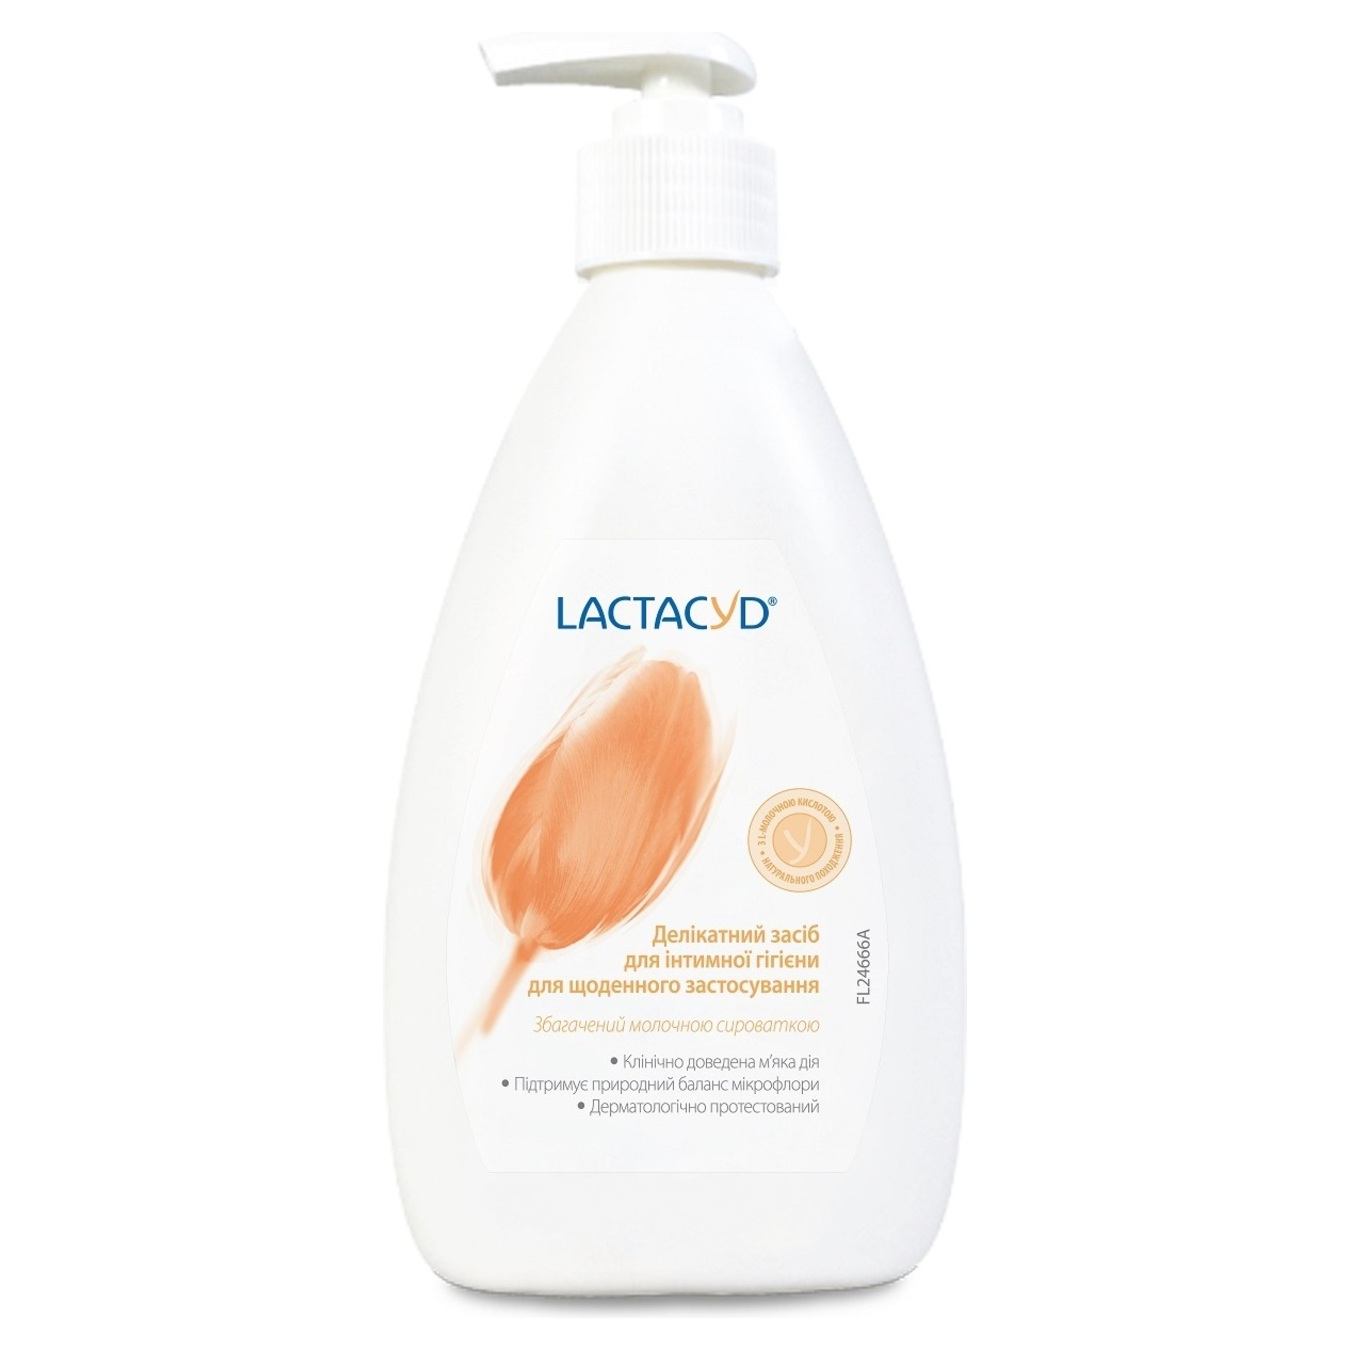 Lactacyd With Dispencer For Intimate Hygiene Gel 400ml 3